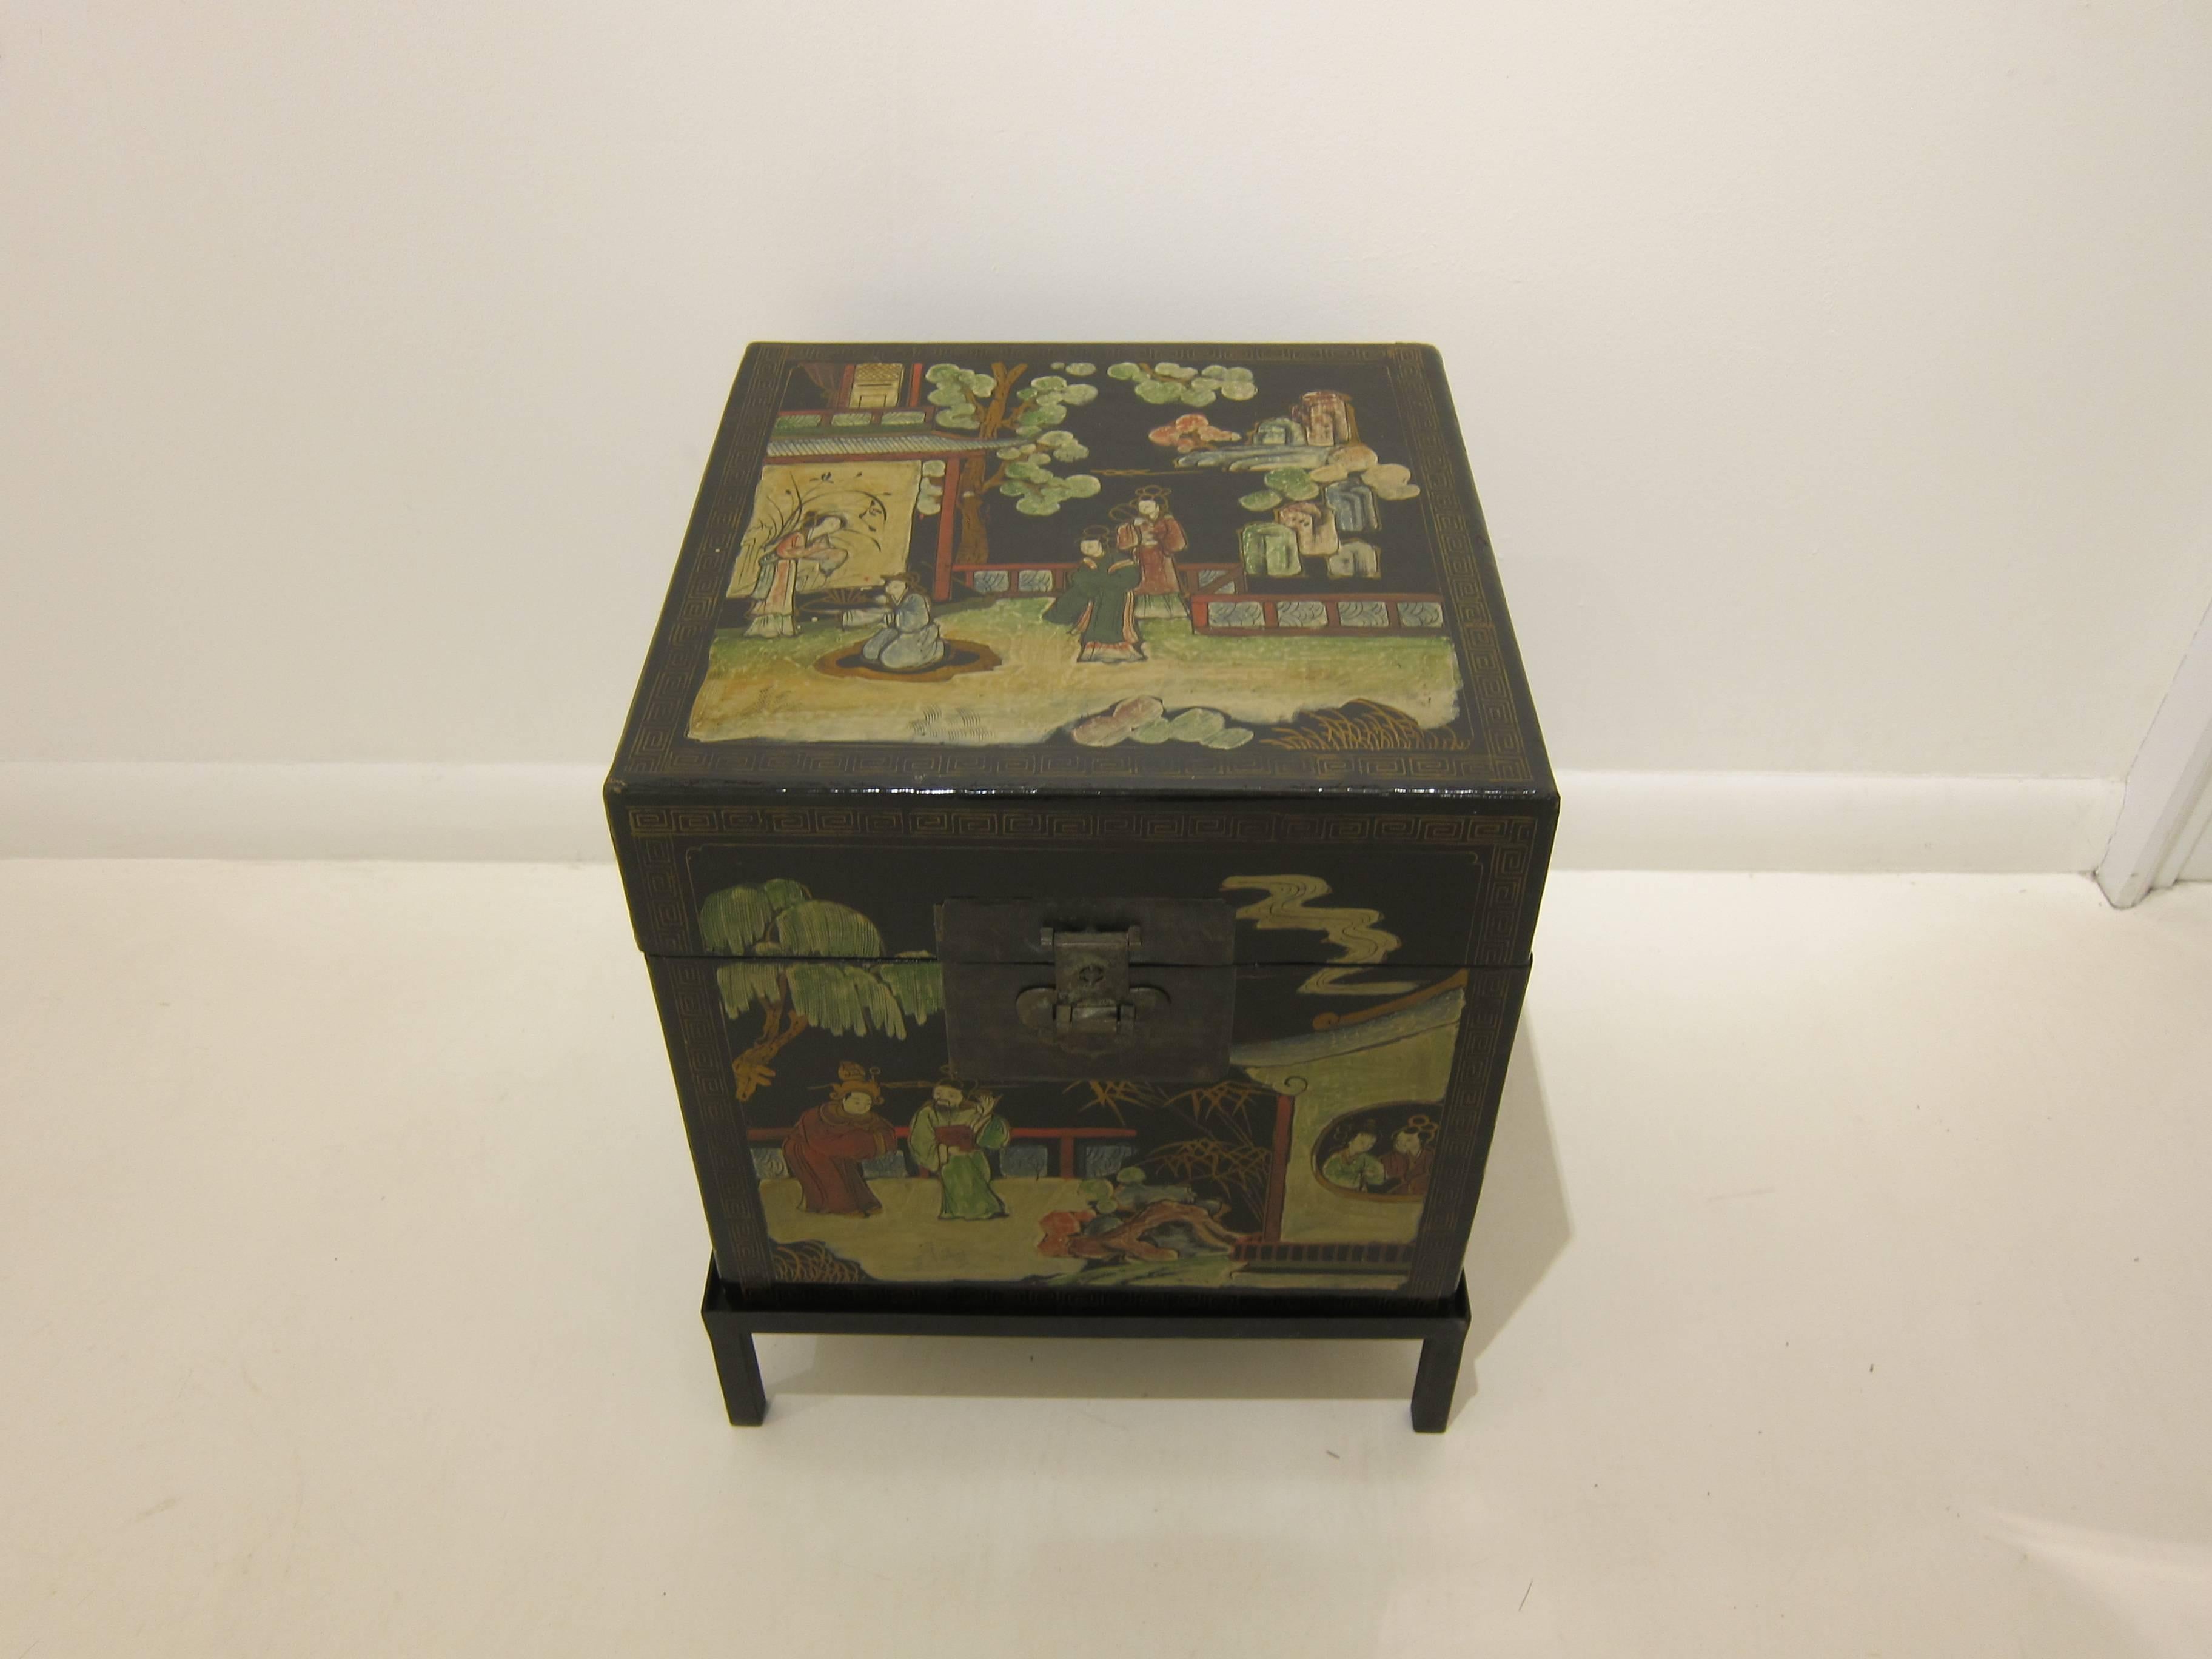 A 19th century painted chinoiserie travel box on iron stand. Excellent side table with storage. Wrapped leather over wood with wonderful painted scenes. Beautiful interior color with good storage capability. China, circa 1890-1900
Very good